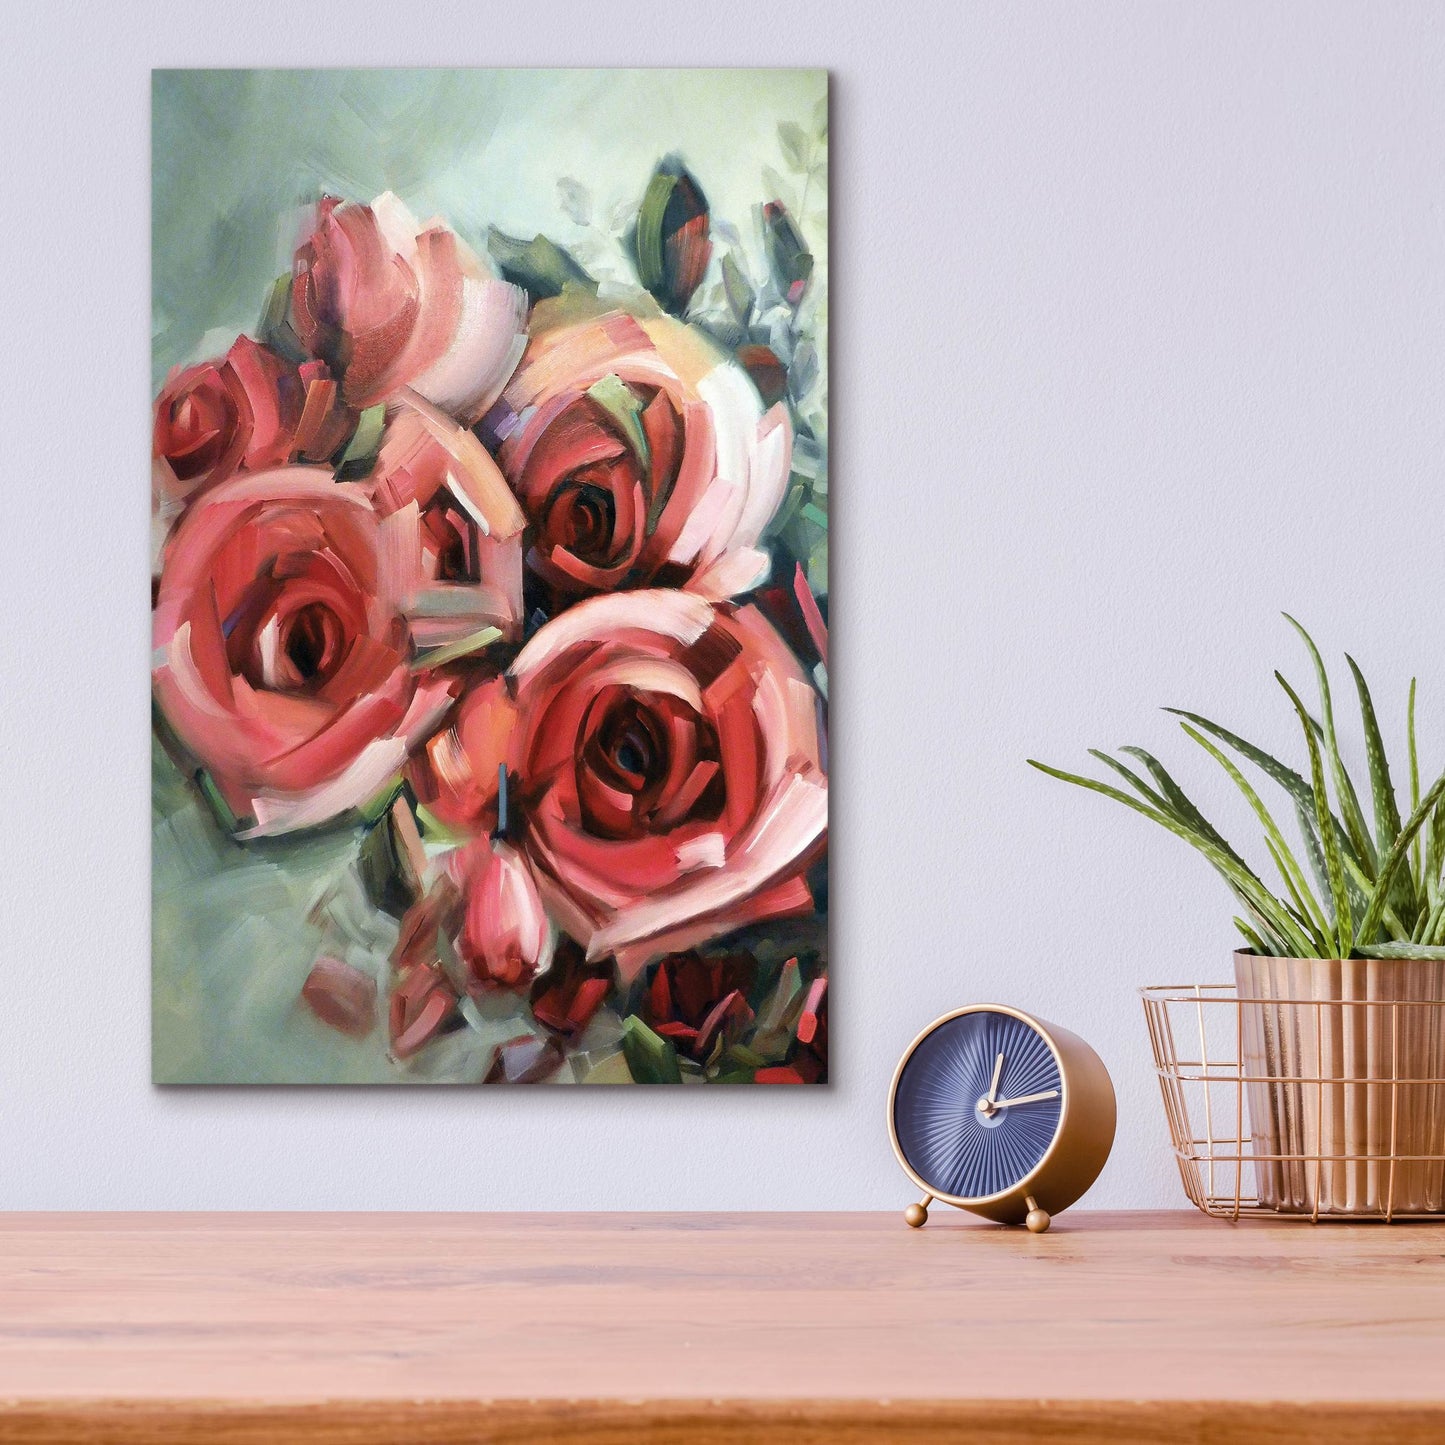 Epic Art 'Amid Scent Of Roses' by Holly Van Hart, Acrylic Glass Wall Art,12x16